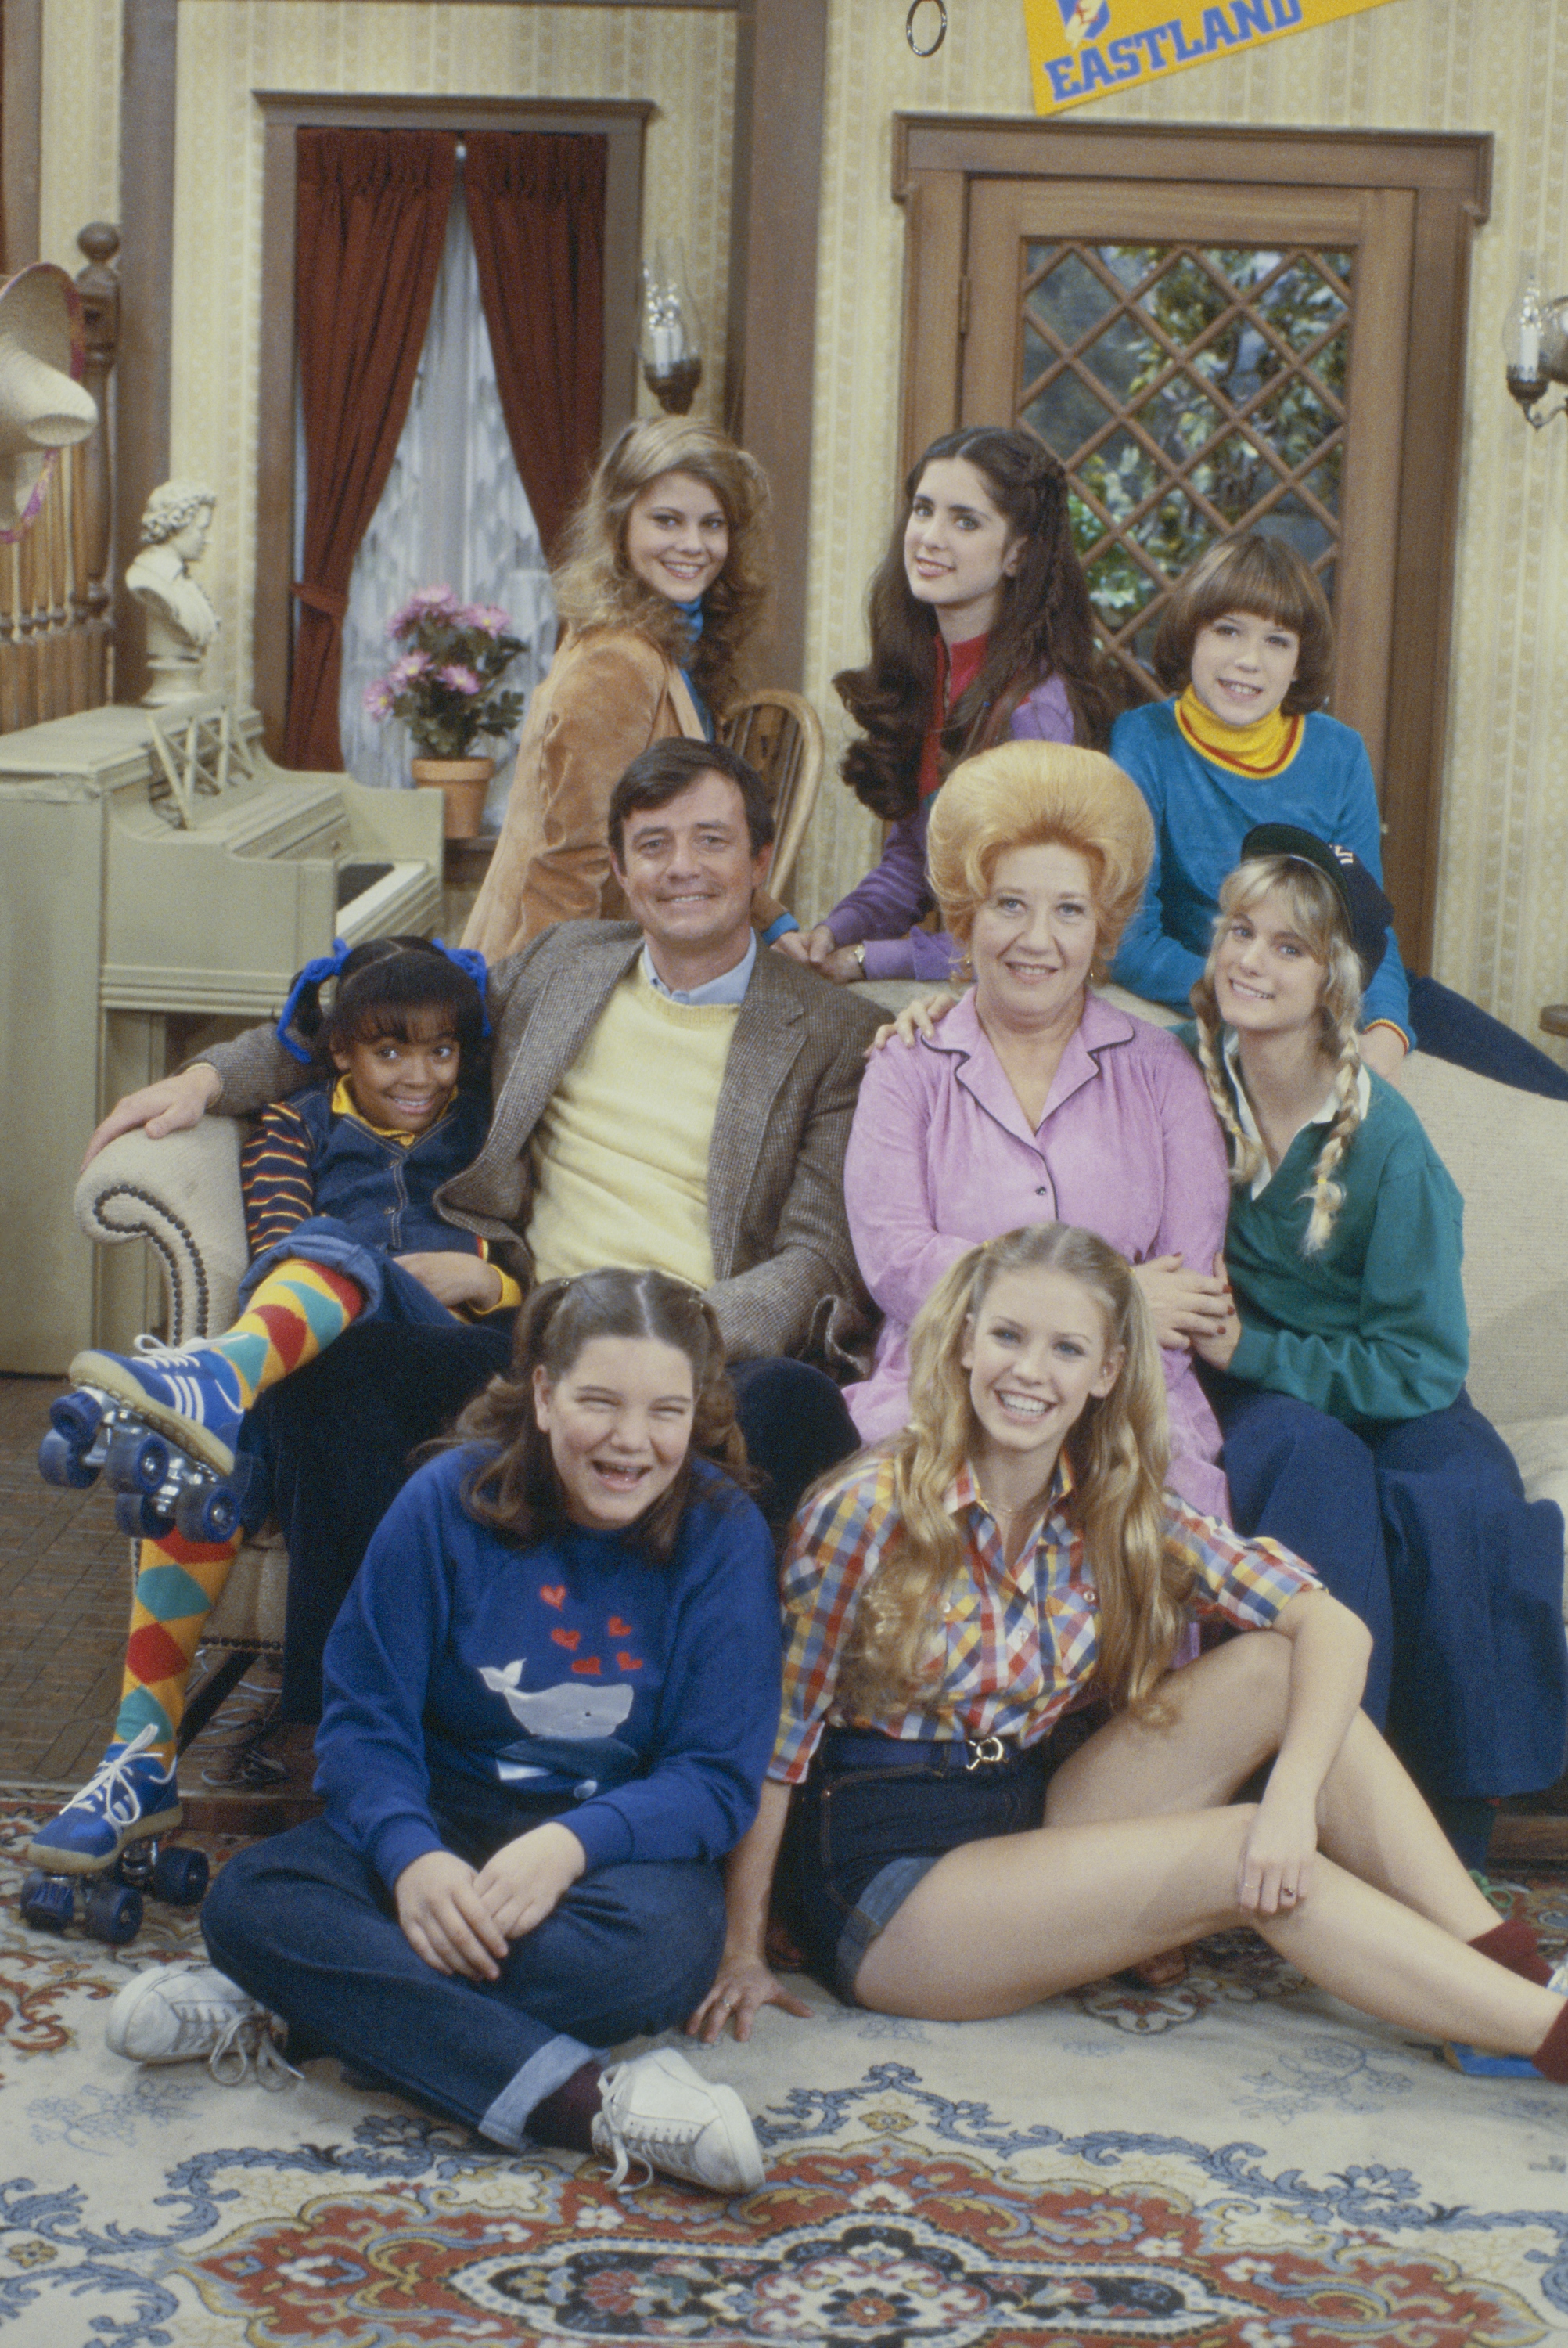 Lisa Whelchel, Felice Schlachter, Molly Ringwald, Kim Fields, John Lawlor, Charlotte Rae, Julie Anne Haddock, Mindy Cohn, and Julie Piekarski  on season 1 of "The Facts of Life" in an undated photo | Source: Getty Images